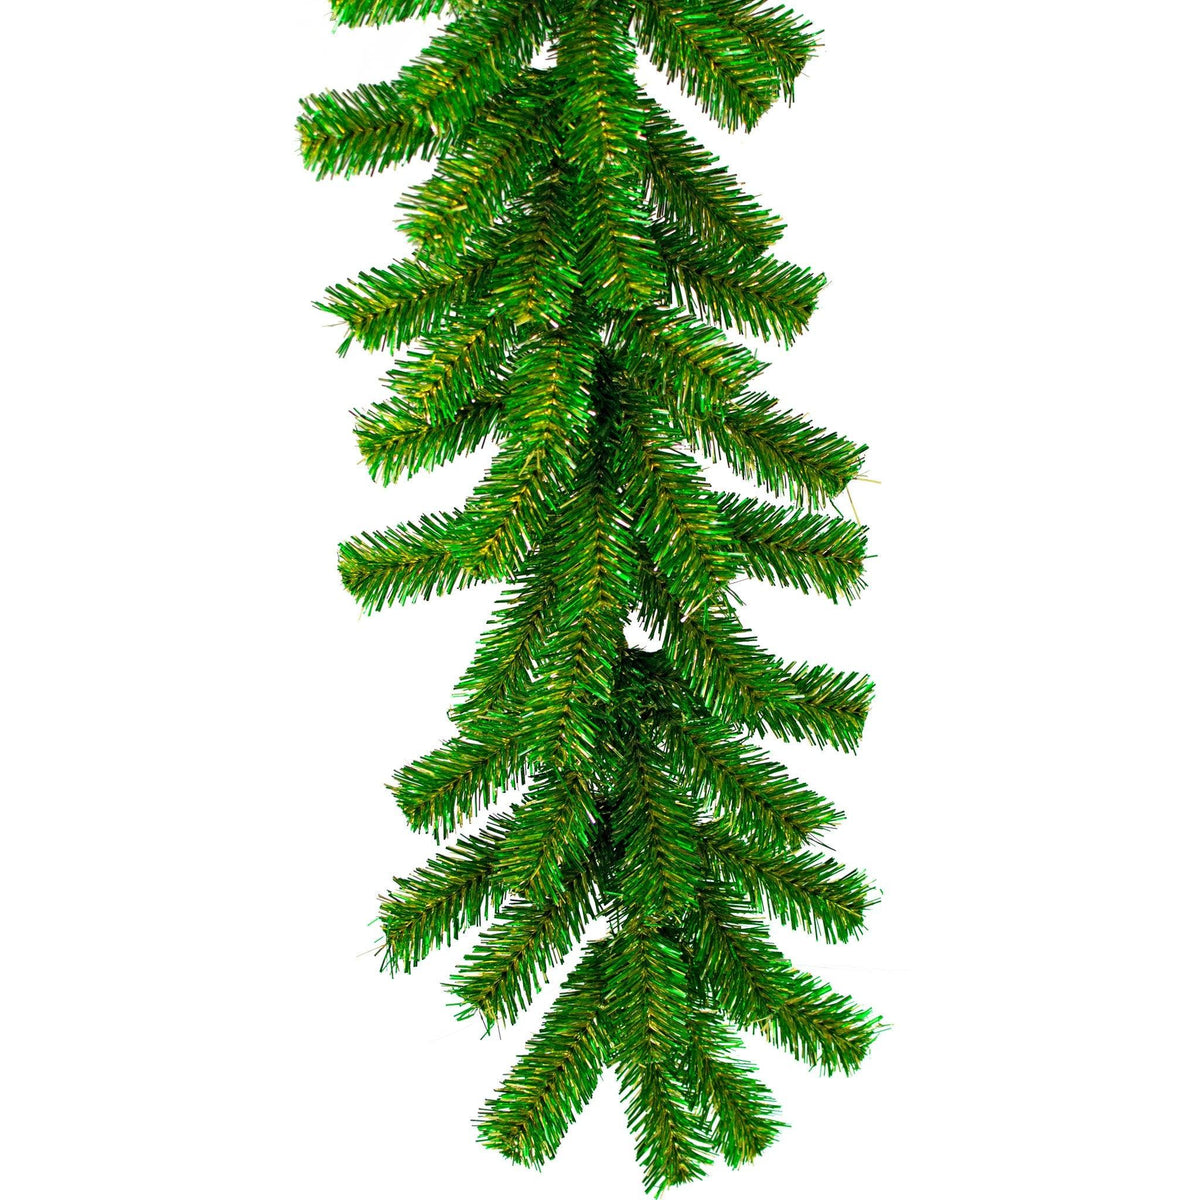 Lee Display's brand new 6ft St. Patrick's Day Christmas Brush Garland is made in the USA and on sale at leedisplay.com